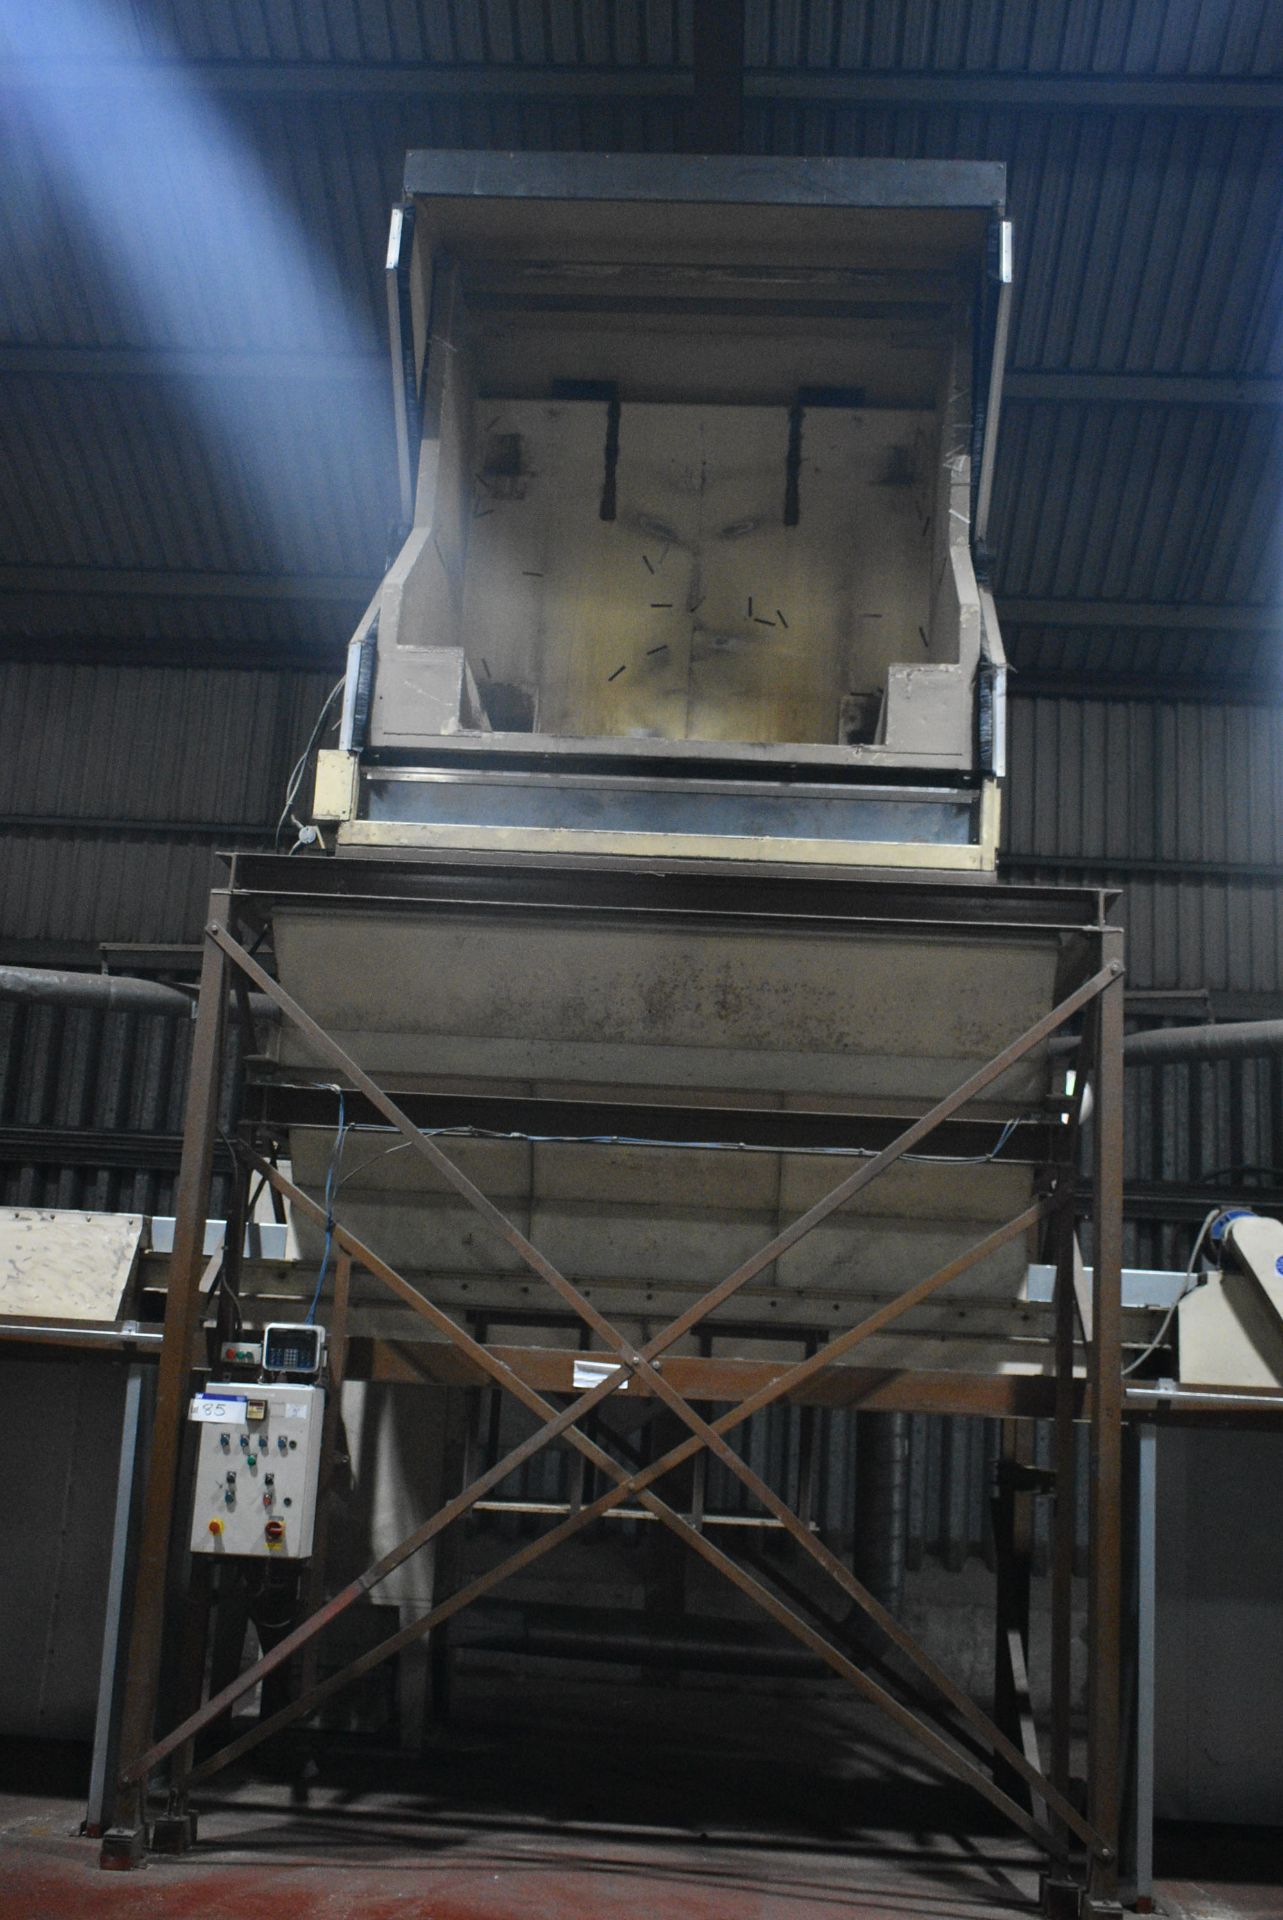 1500kg capacity LOSS IN WEIGHT WEIGHER, approx. 8.5m x 2.2m x 6.8m total footprint, with bin tippler - Image 3 of 7